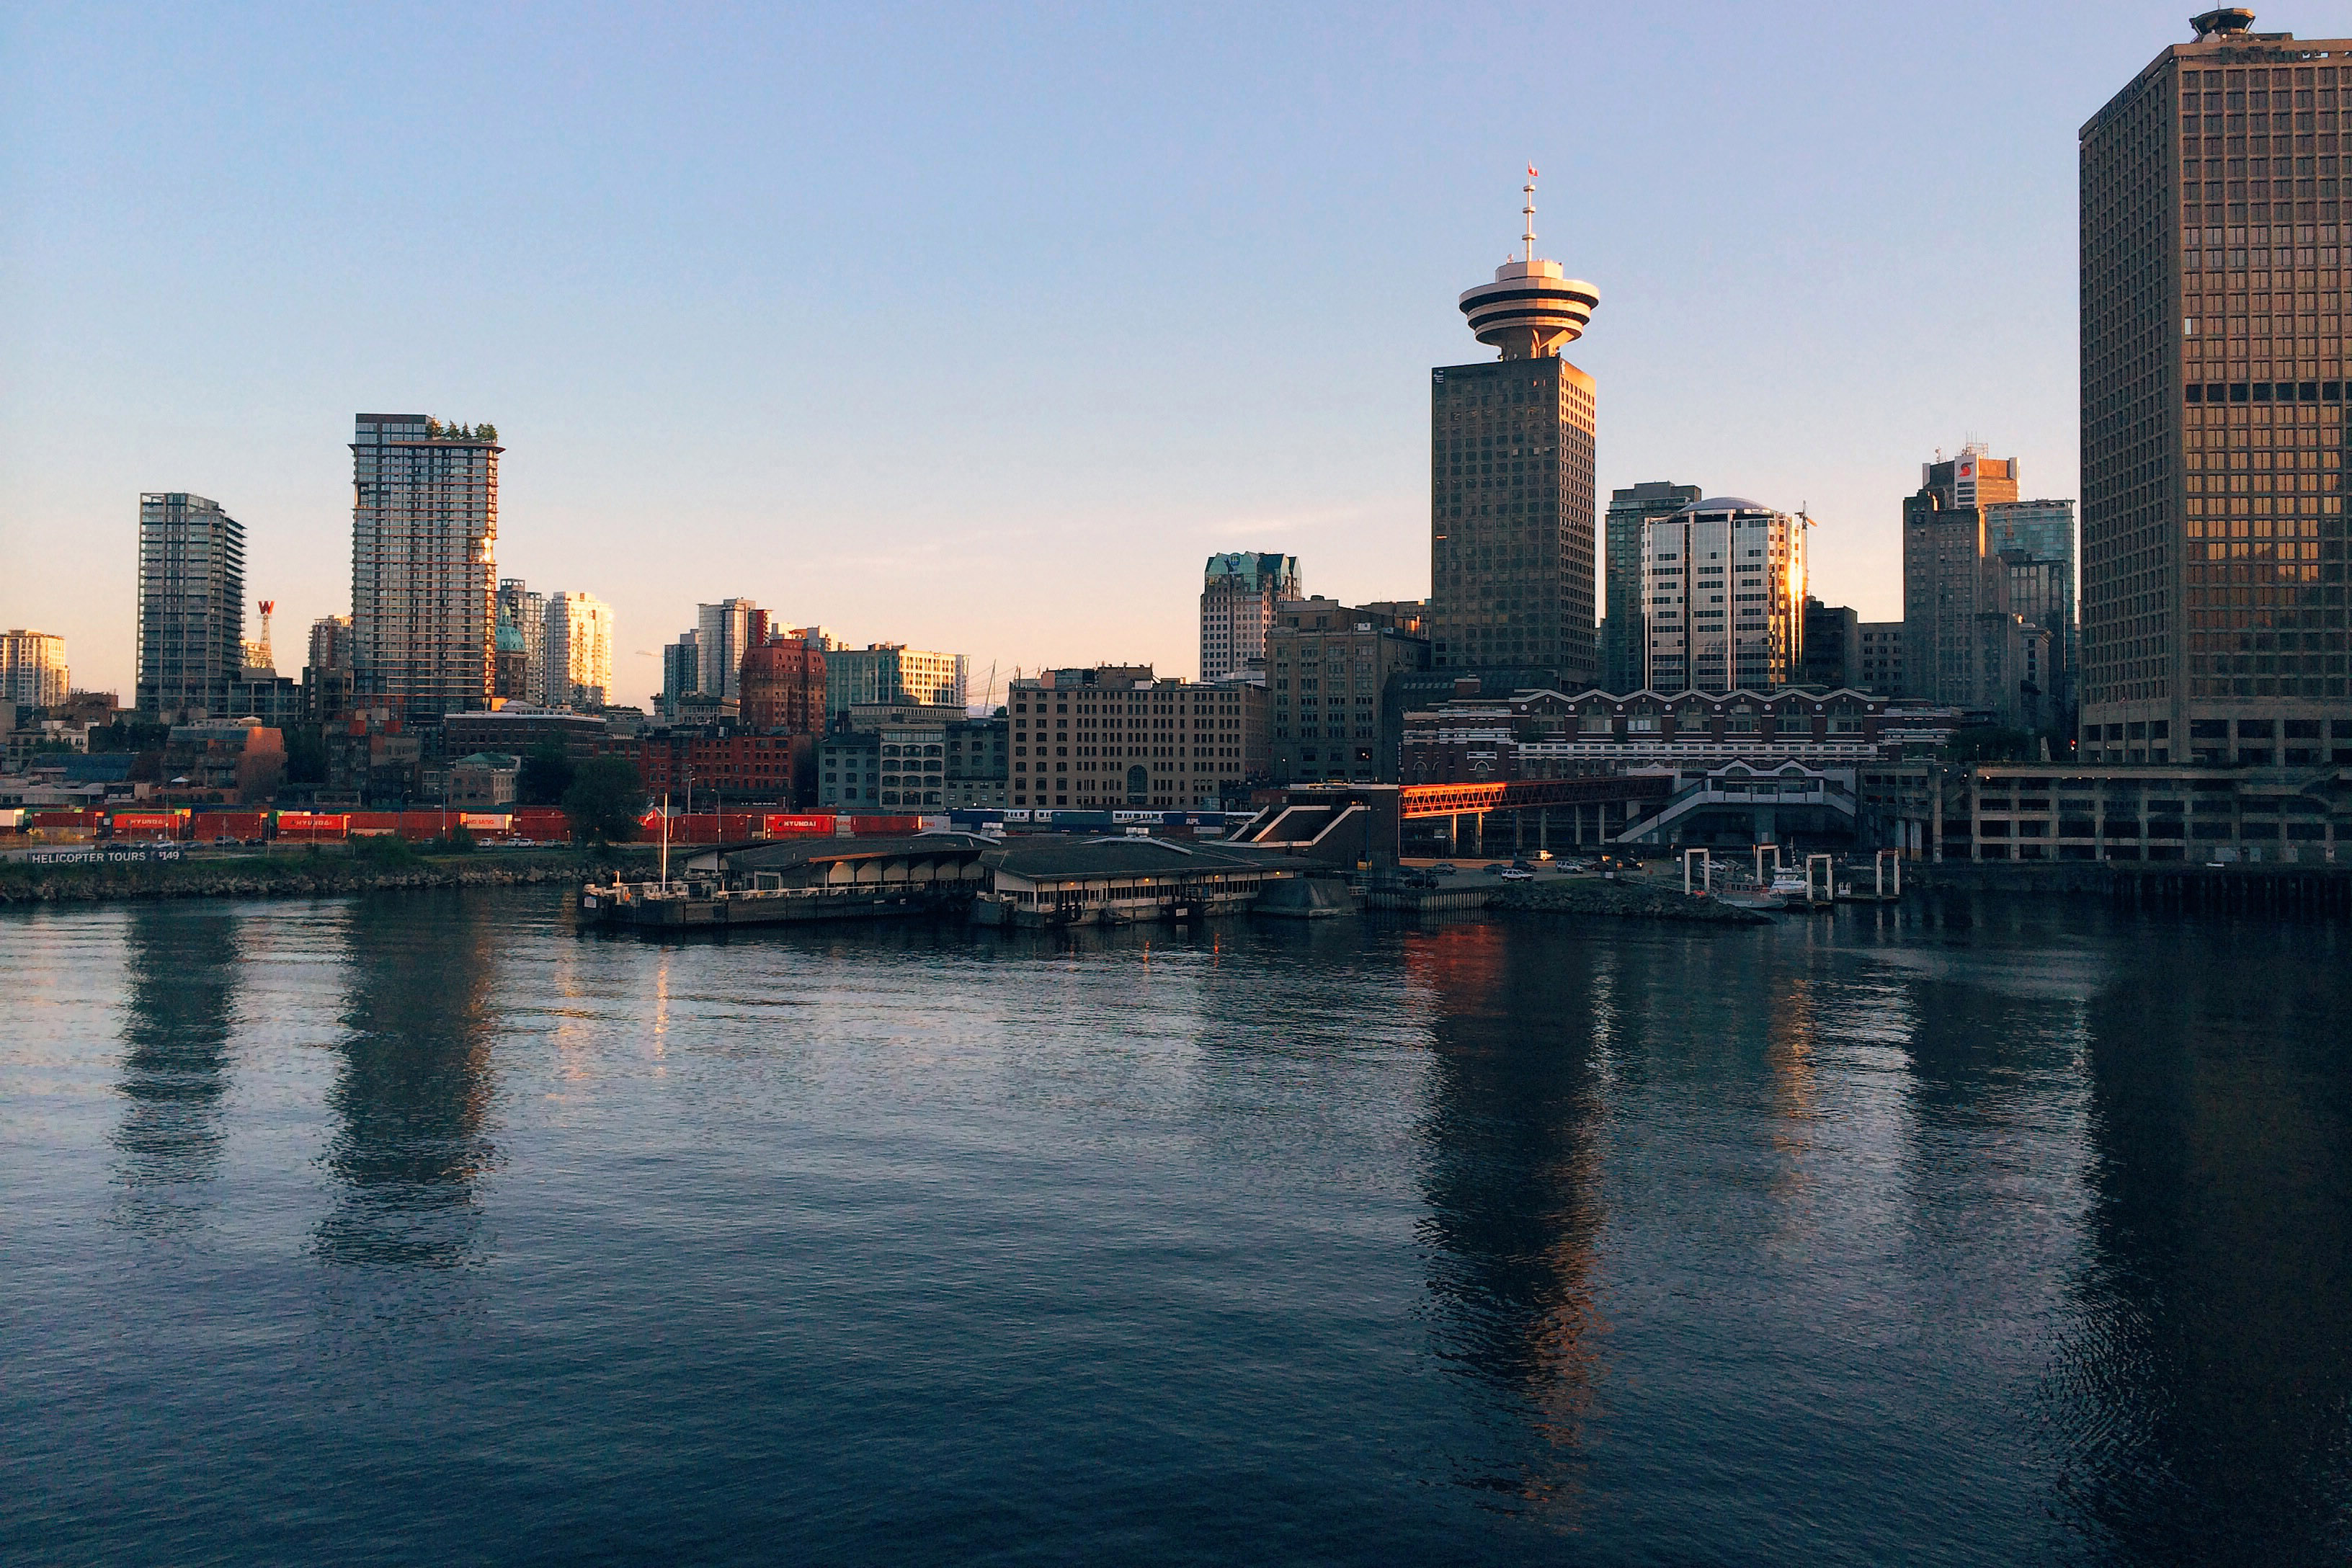 Skyline of Vancouver near the docks in British Columbia, Canada image ...